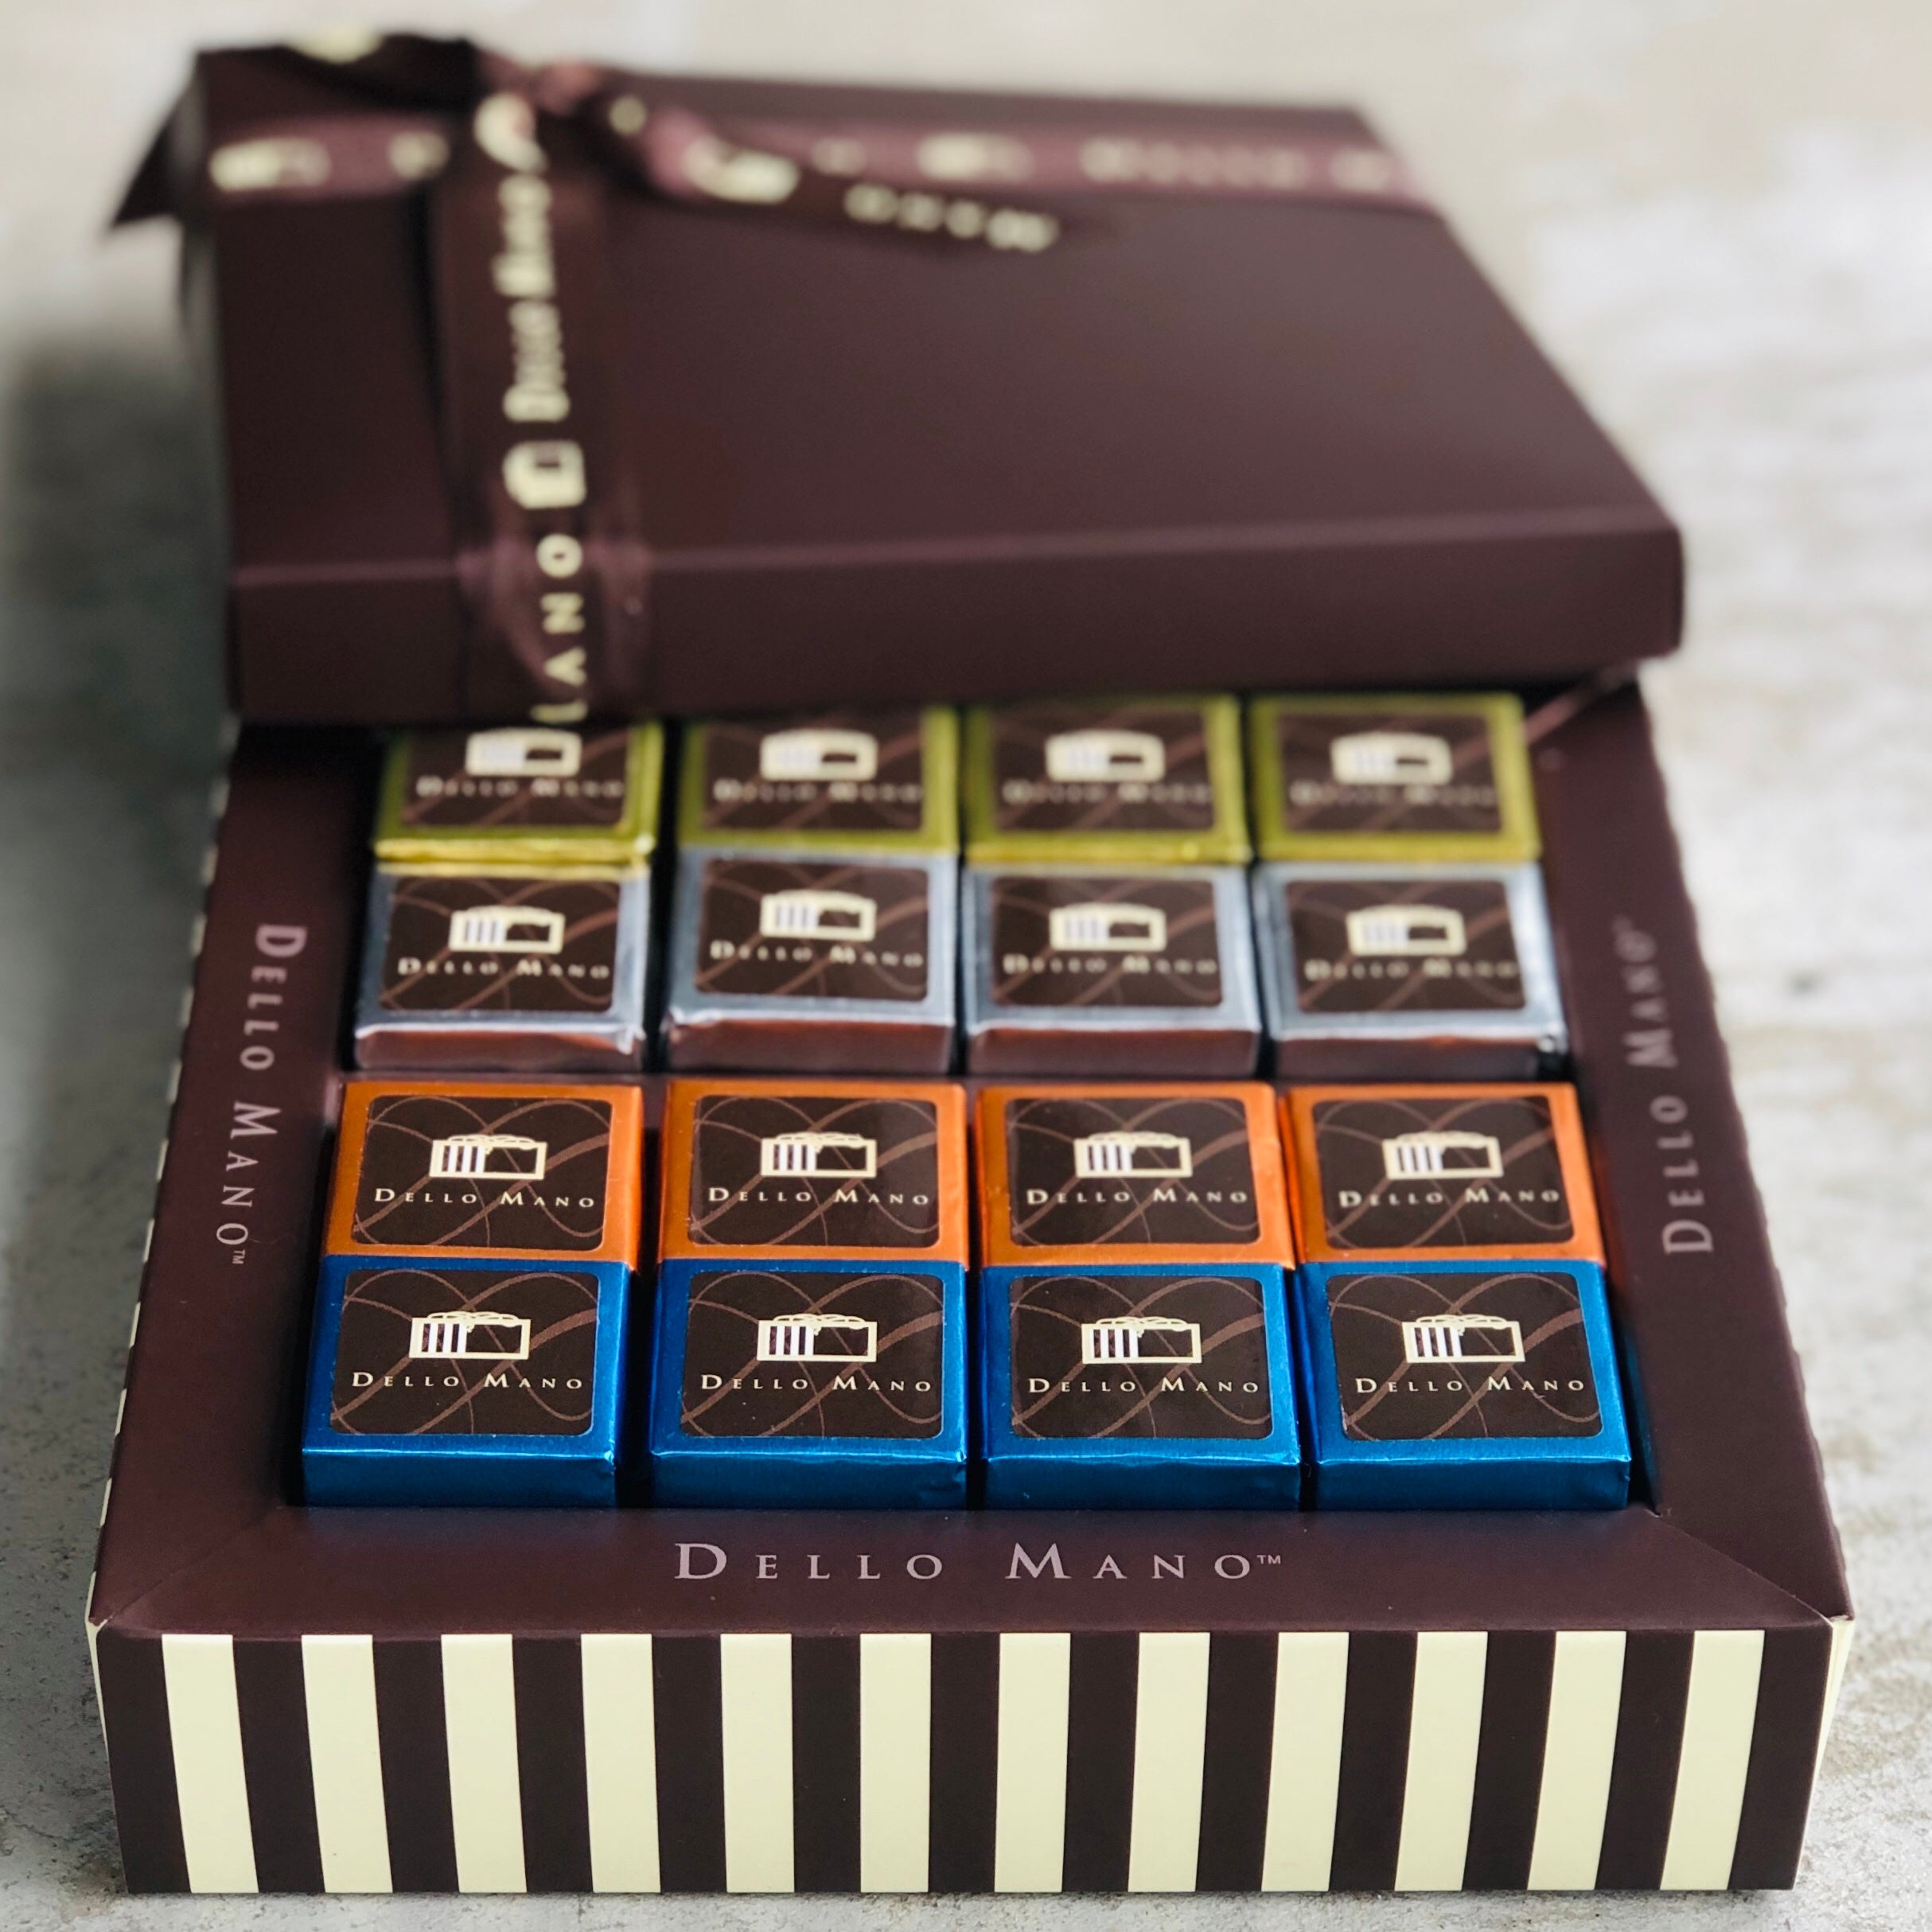 Four rows of four colourful foiled brownies in a chocolate gift box. Rows of blue, orange, silver and gold foiled brownies are tucked inside the striped chocolate gift box. The box has words saying Dello Mano